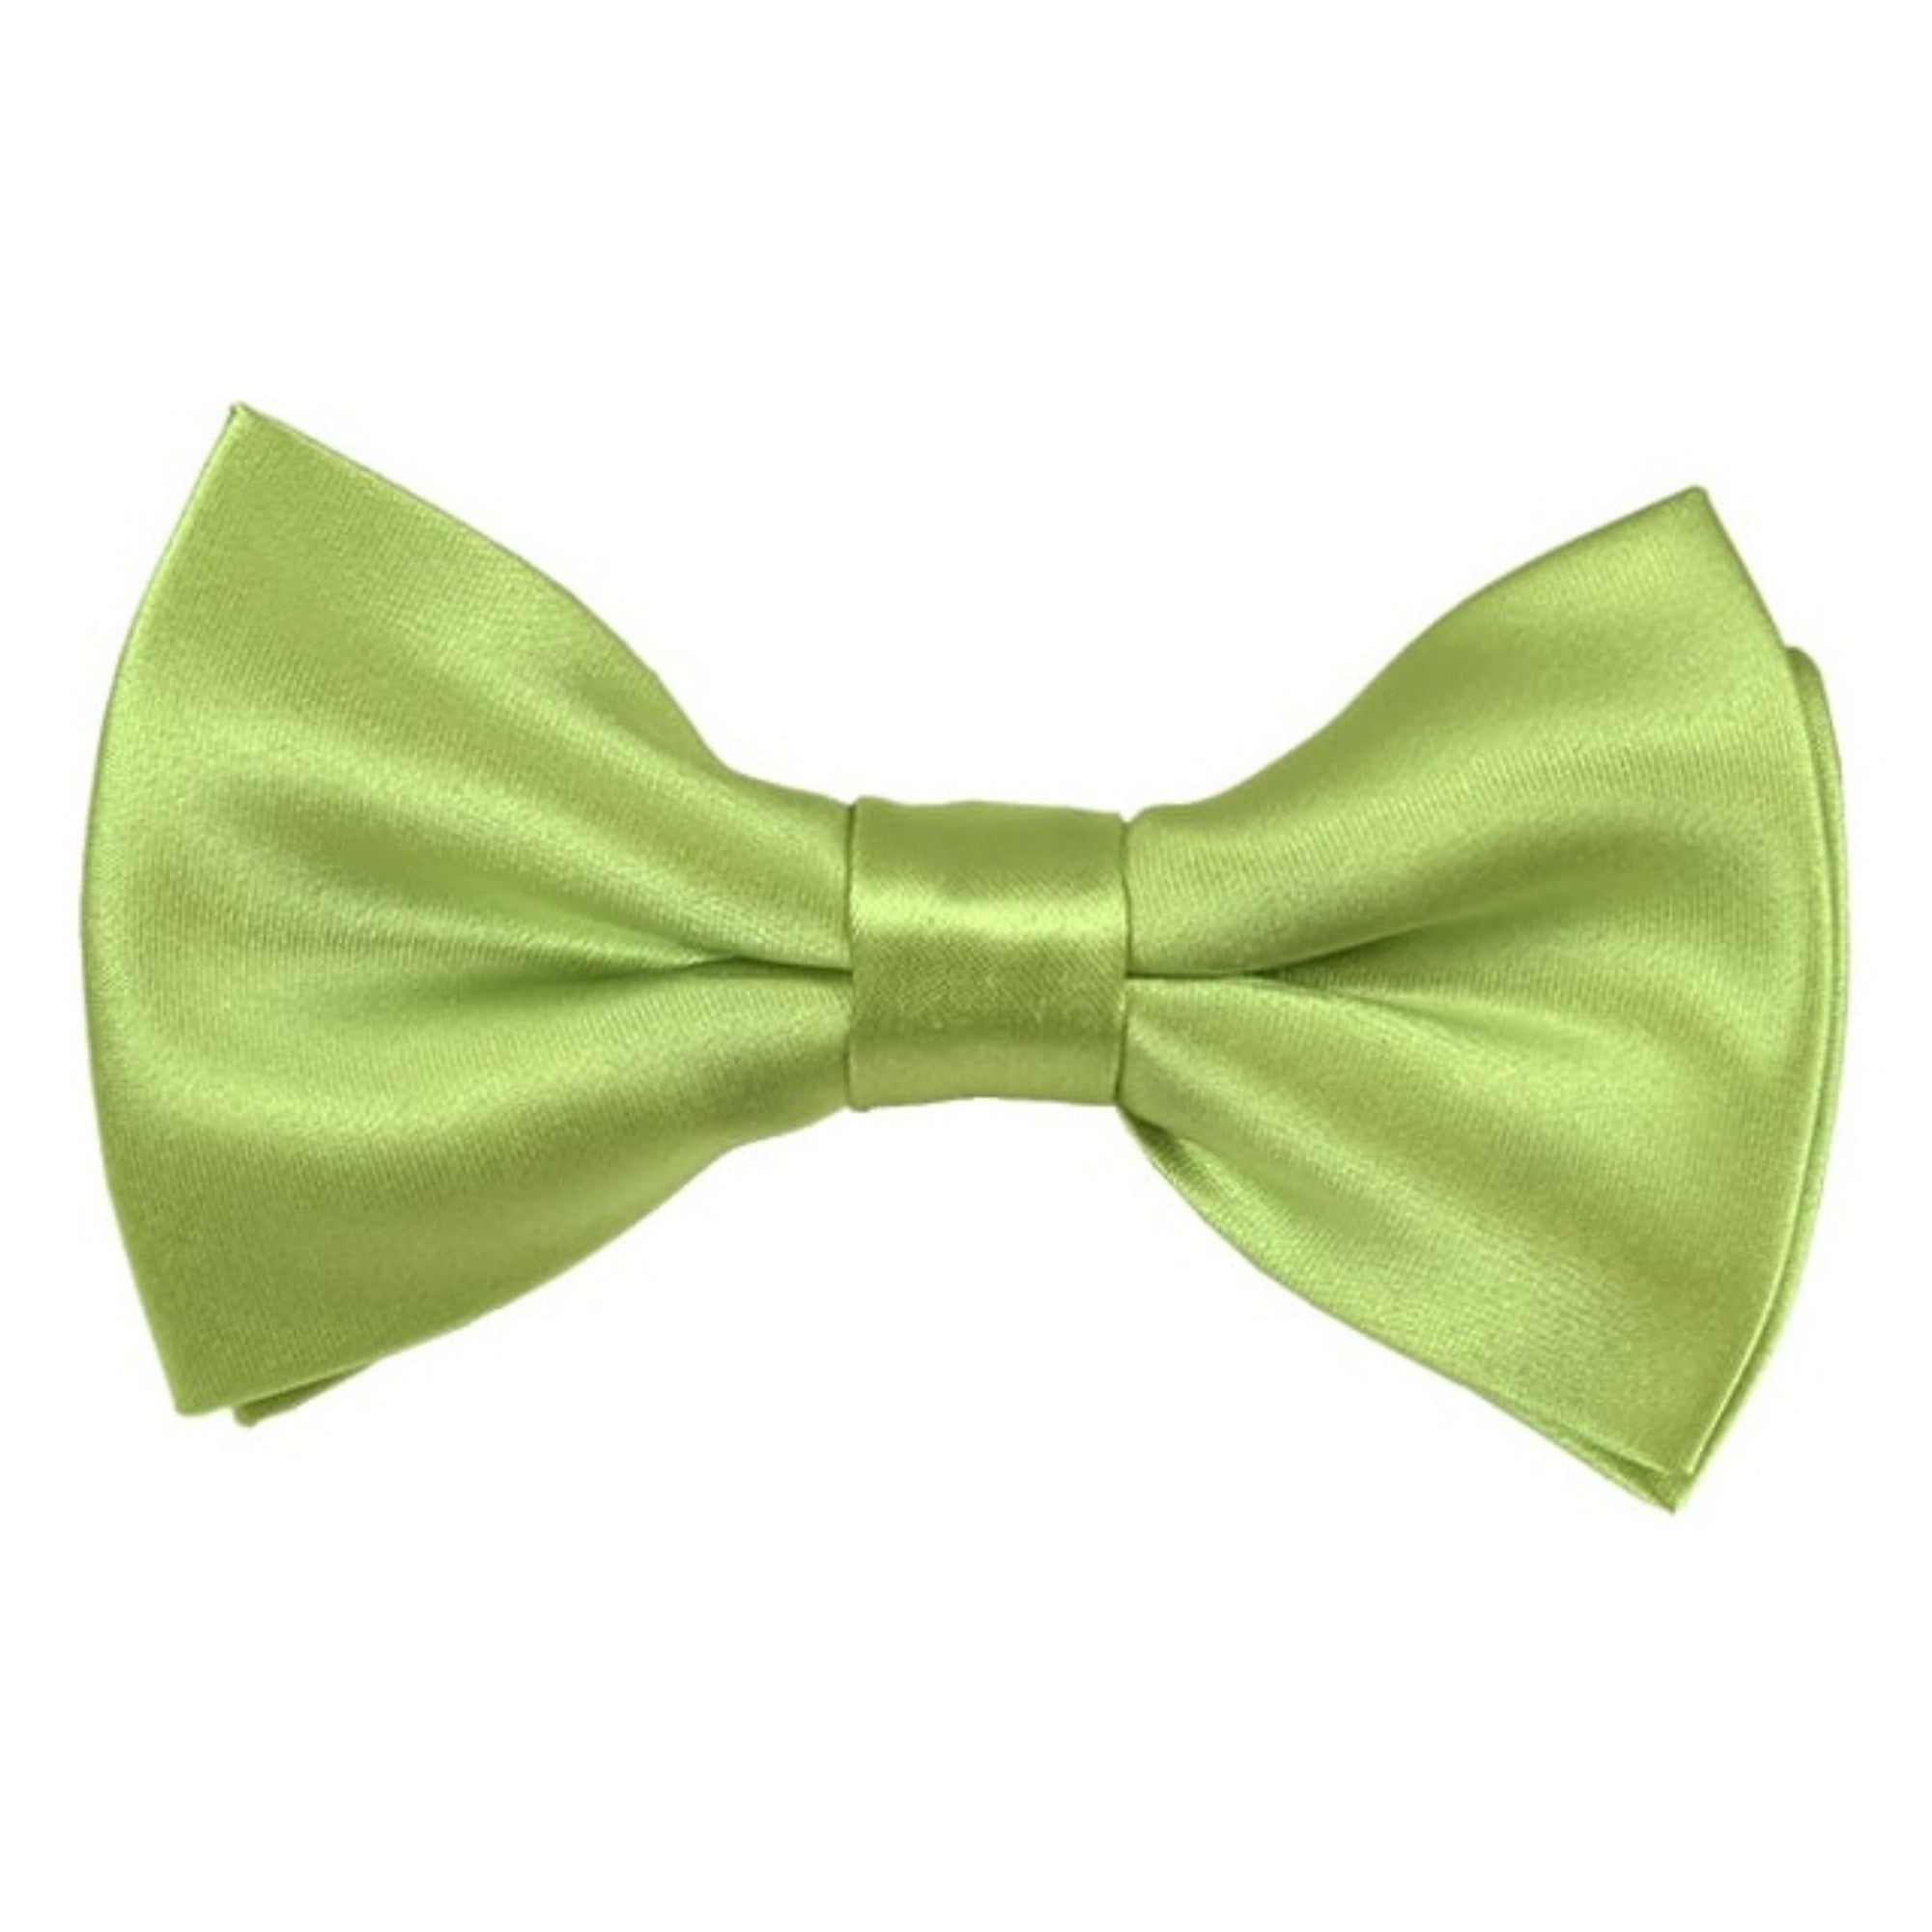 TheDapperTie Men's Solid Color 2.5 W And 4.5 L Inch Pre-Tied adjustable Bow Ties Men's Solid Color Bow Tie TheDapperTie Pear Green  